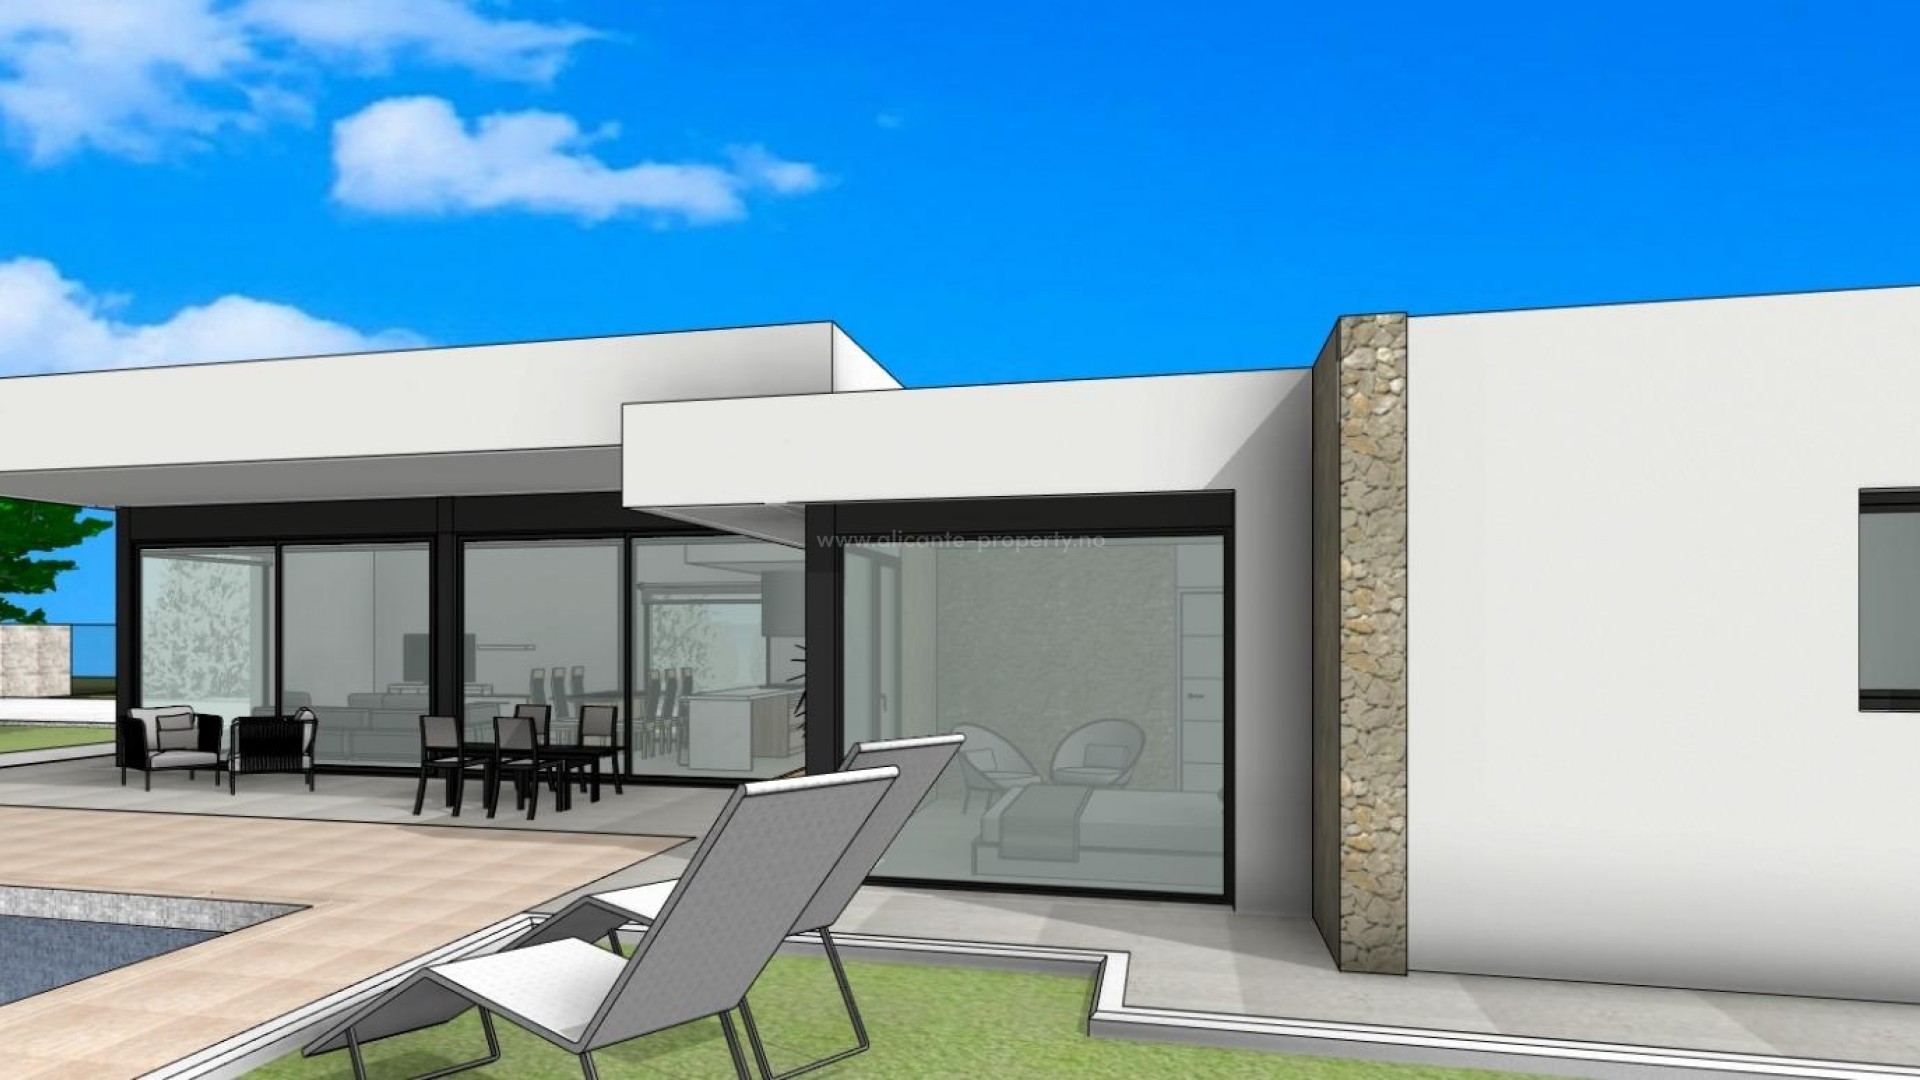 New built luxury villa for sale in Pinoso (Alicante), 3 bedrooms, 2 bathrooms, terrace, idyllic view of the mountains, swimming pool w/salt water chlorinator,